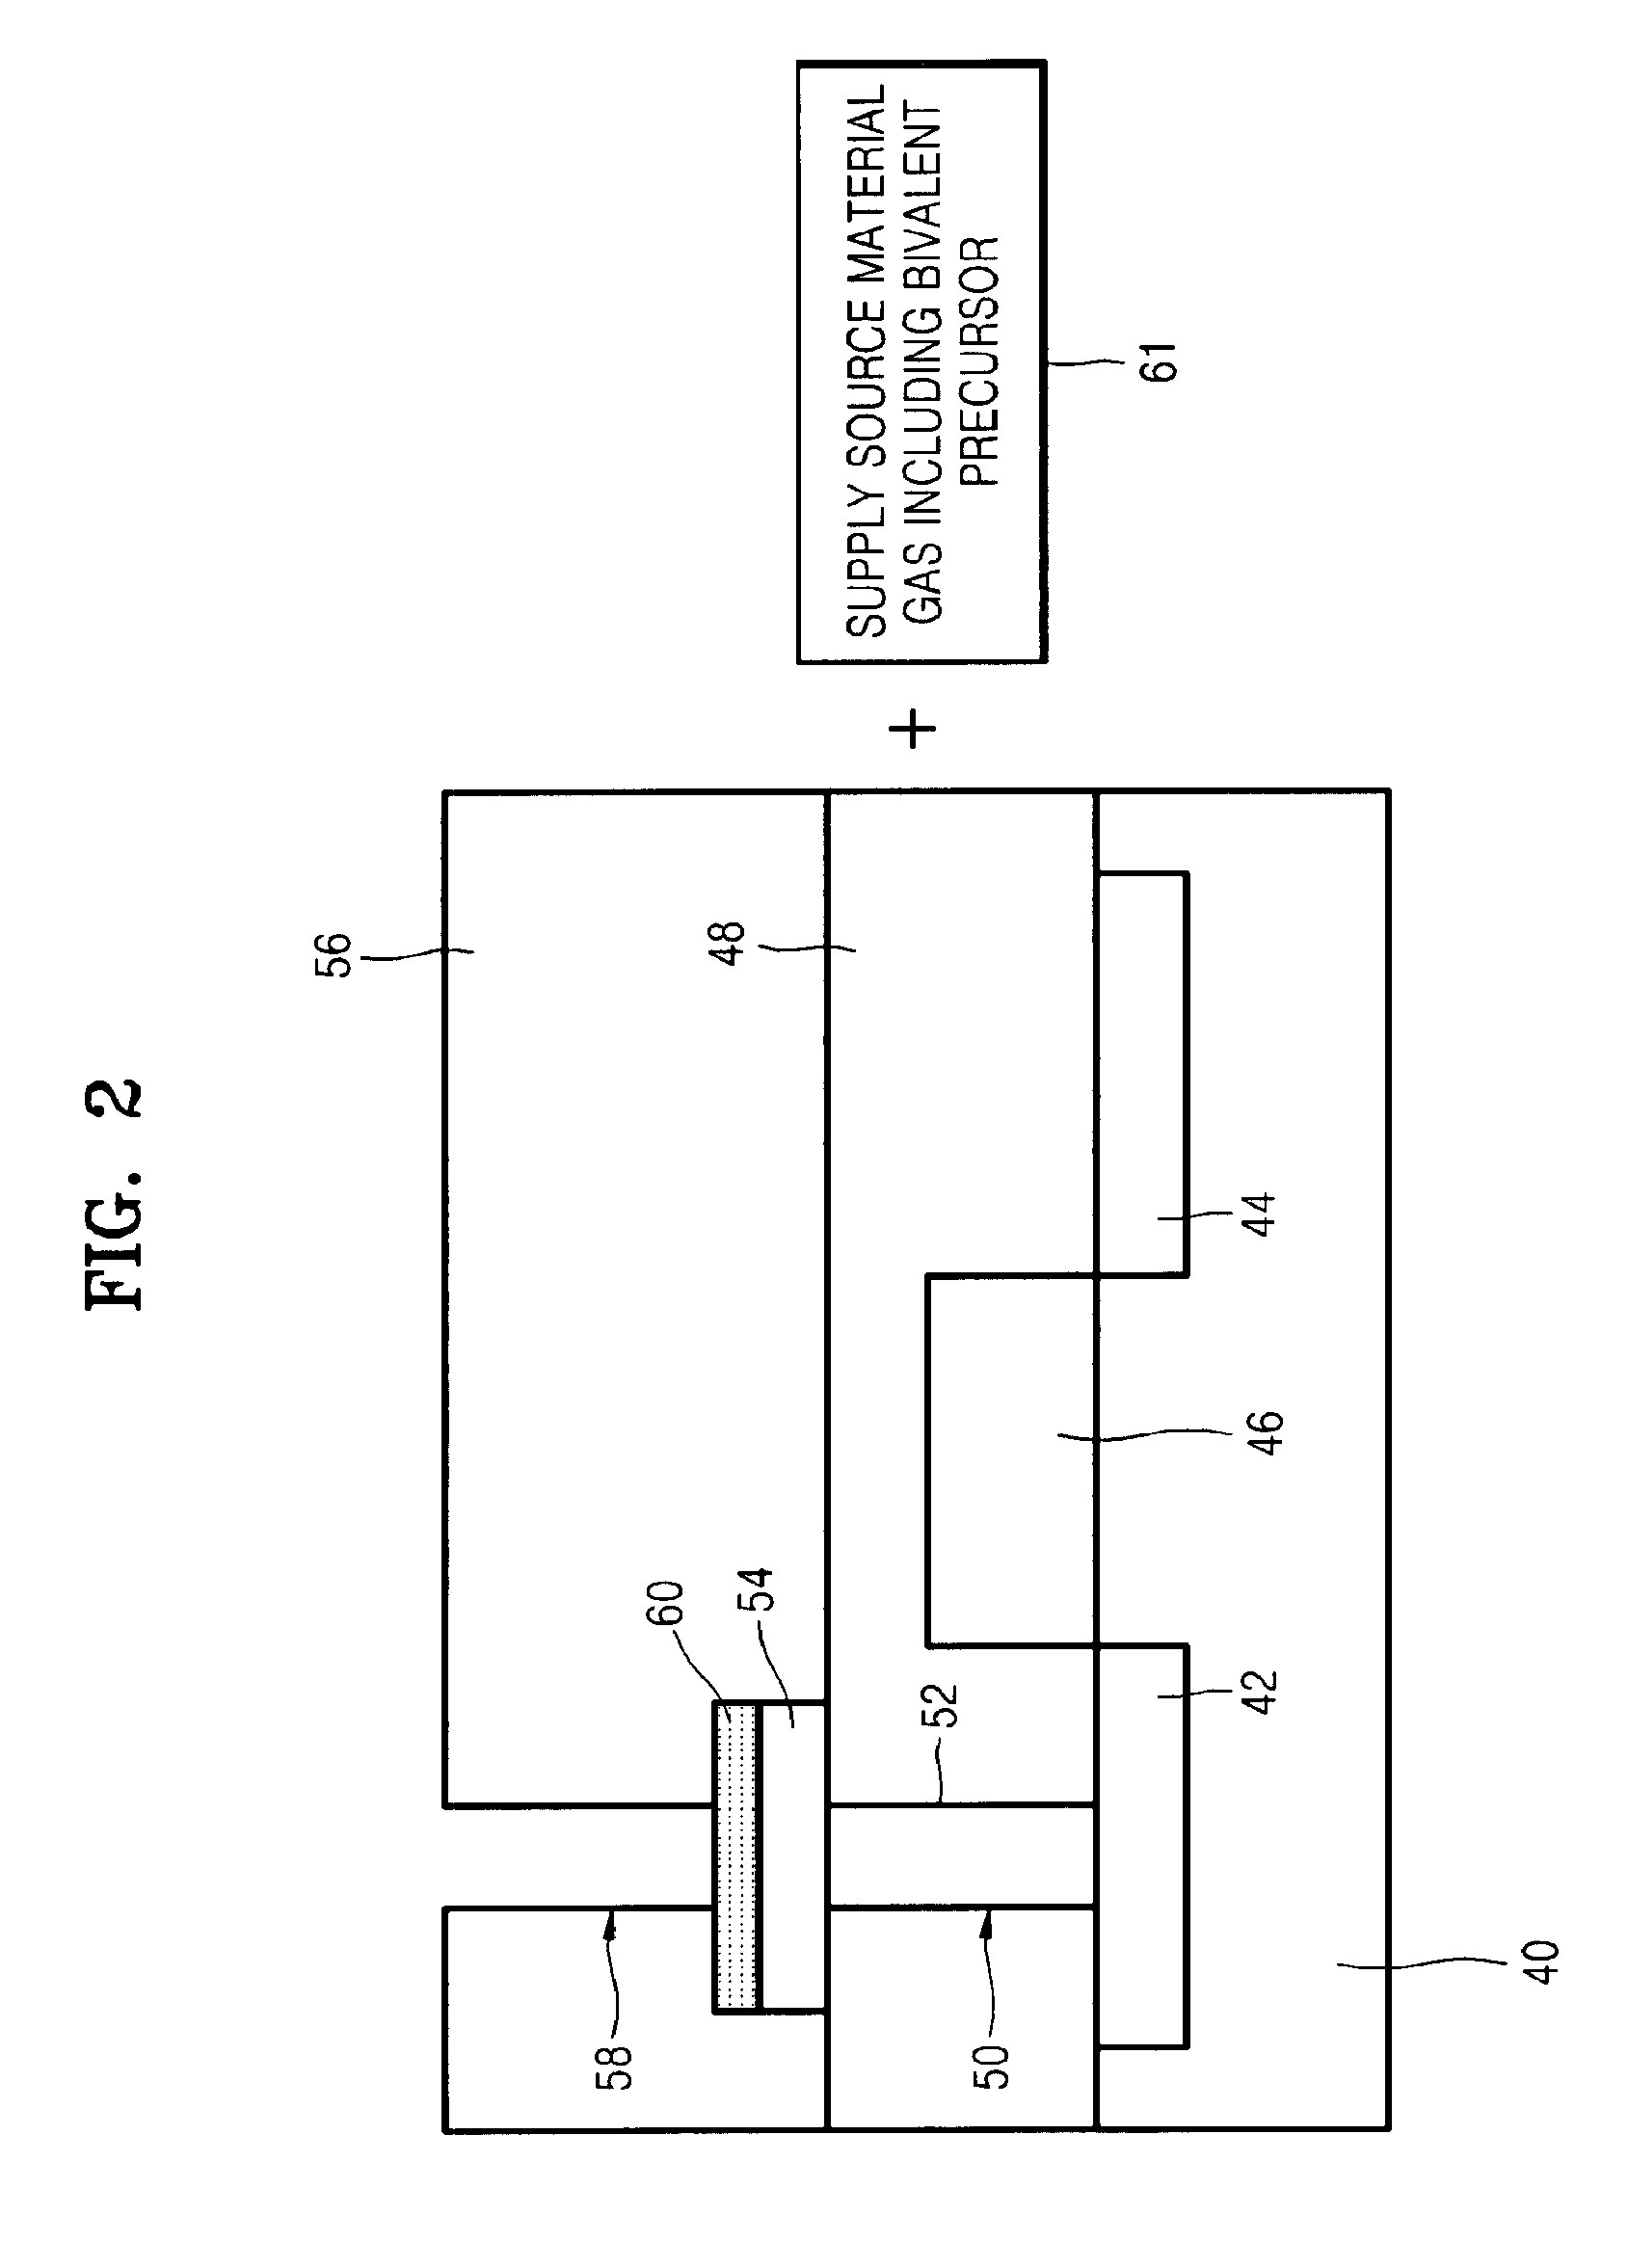 Method of forming a phase change layer and method of manufacturing a storage node having the phase change layer